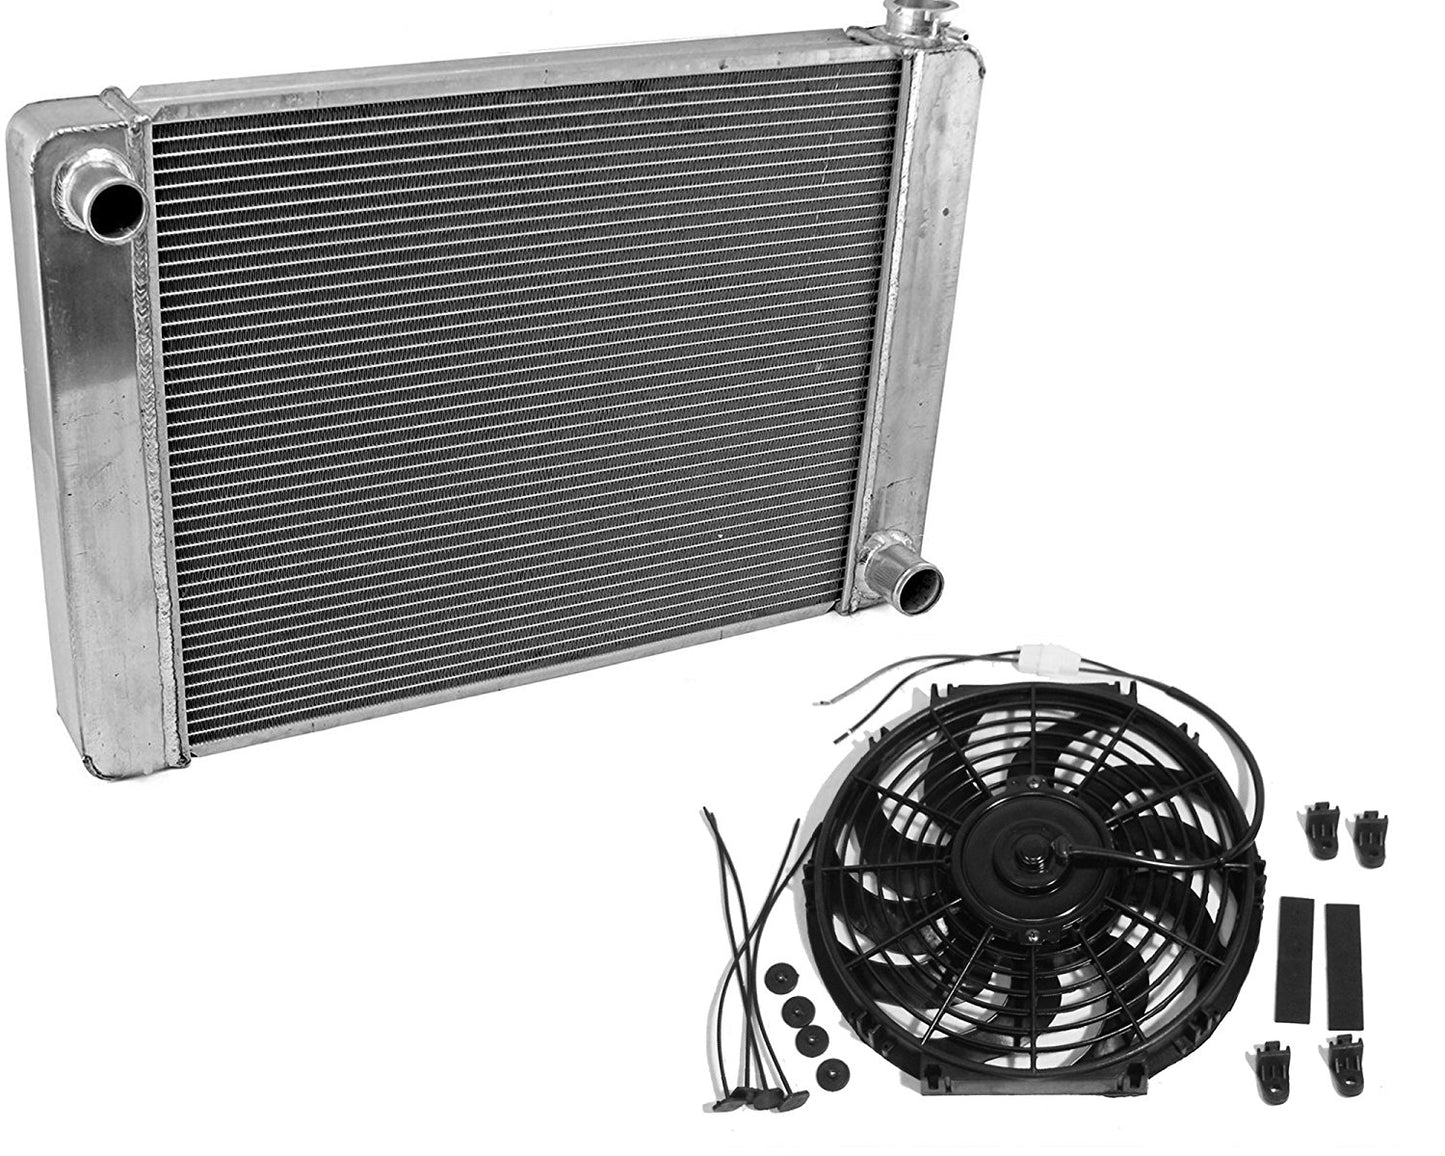 Fabricated Aluminum Radiator 30" x 19" x3" Overall For SBC BBC Chevy GM & 12" Electric Curved Blade Reversible Cooling Fan